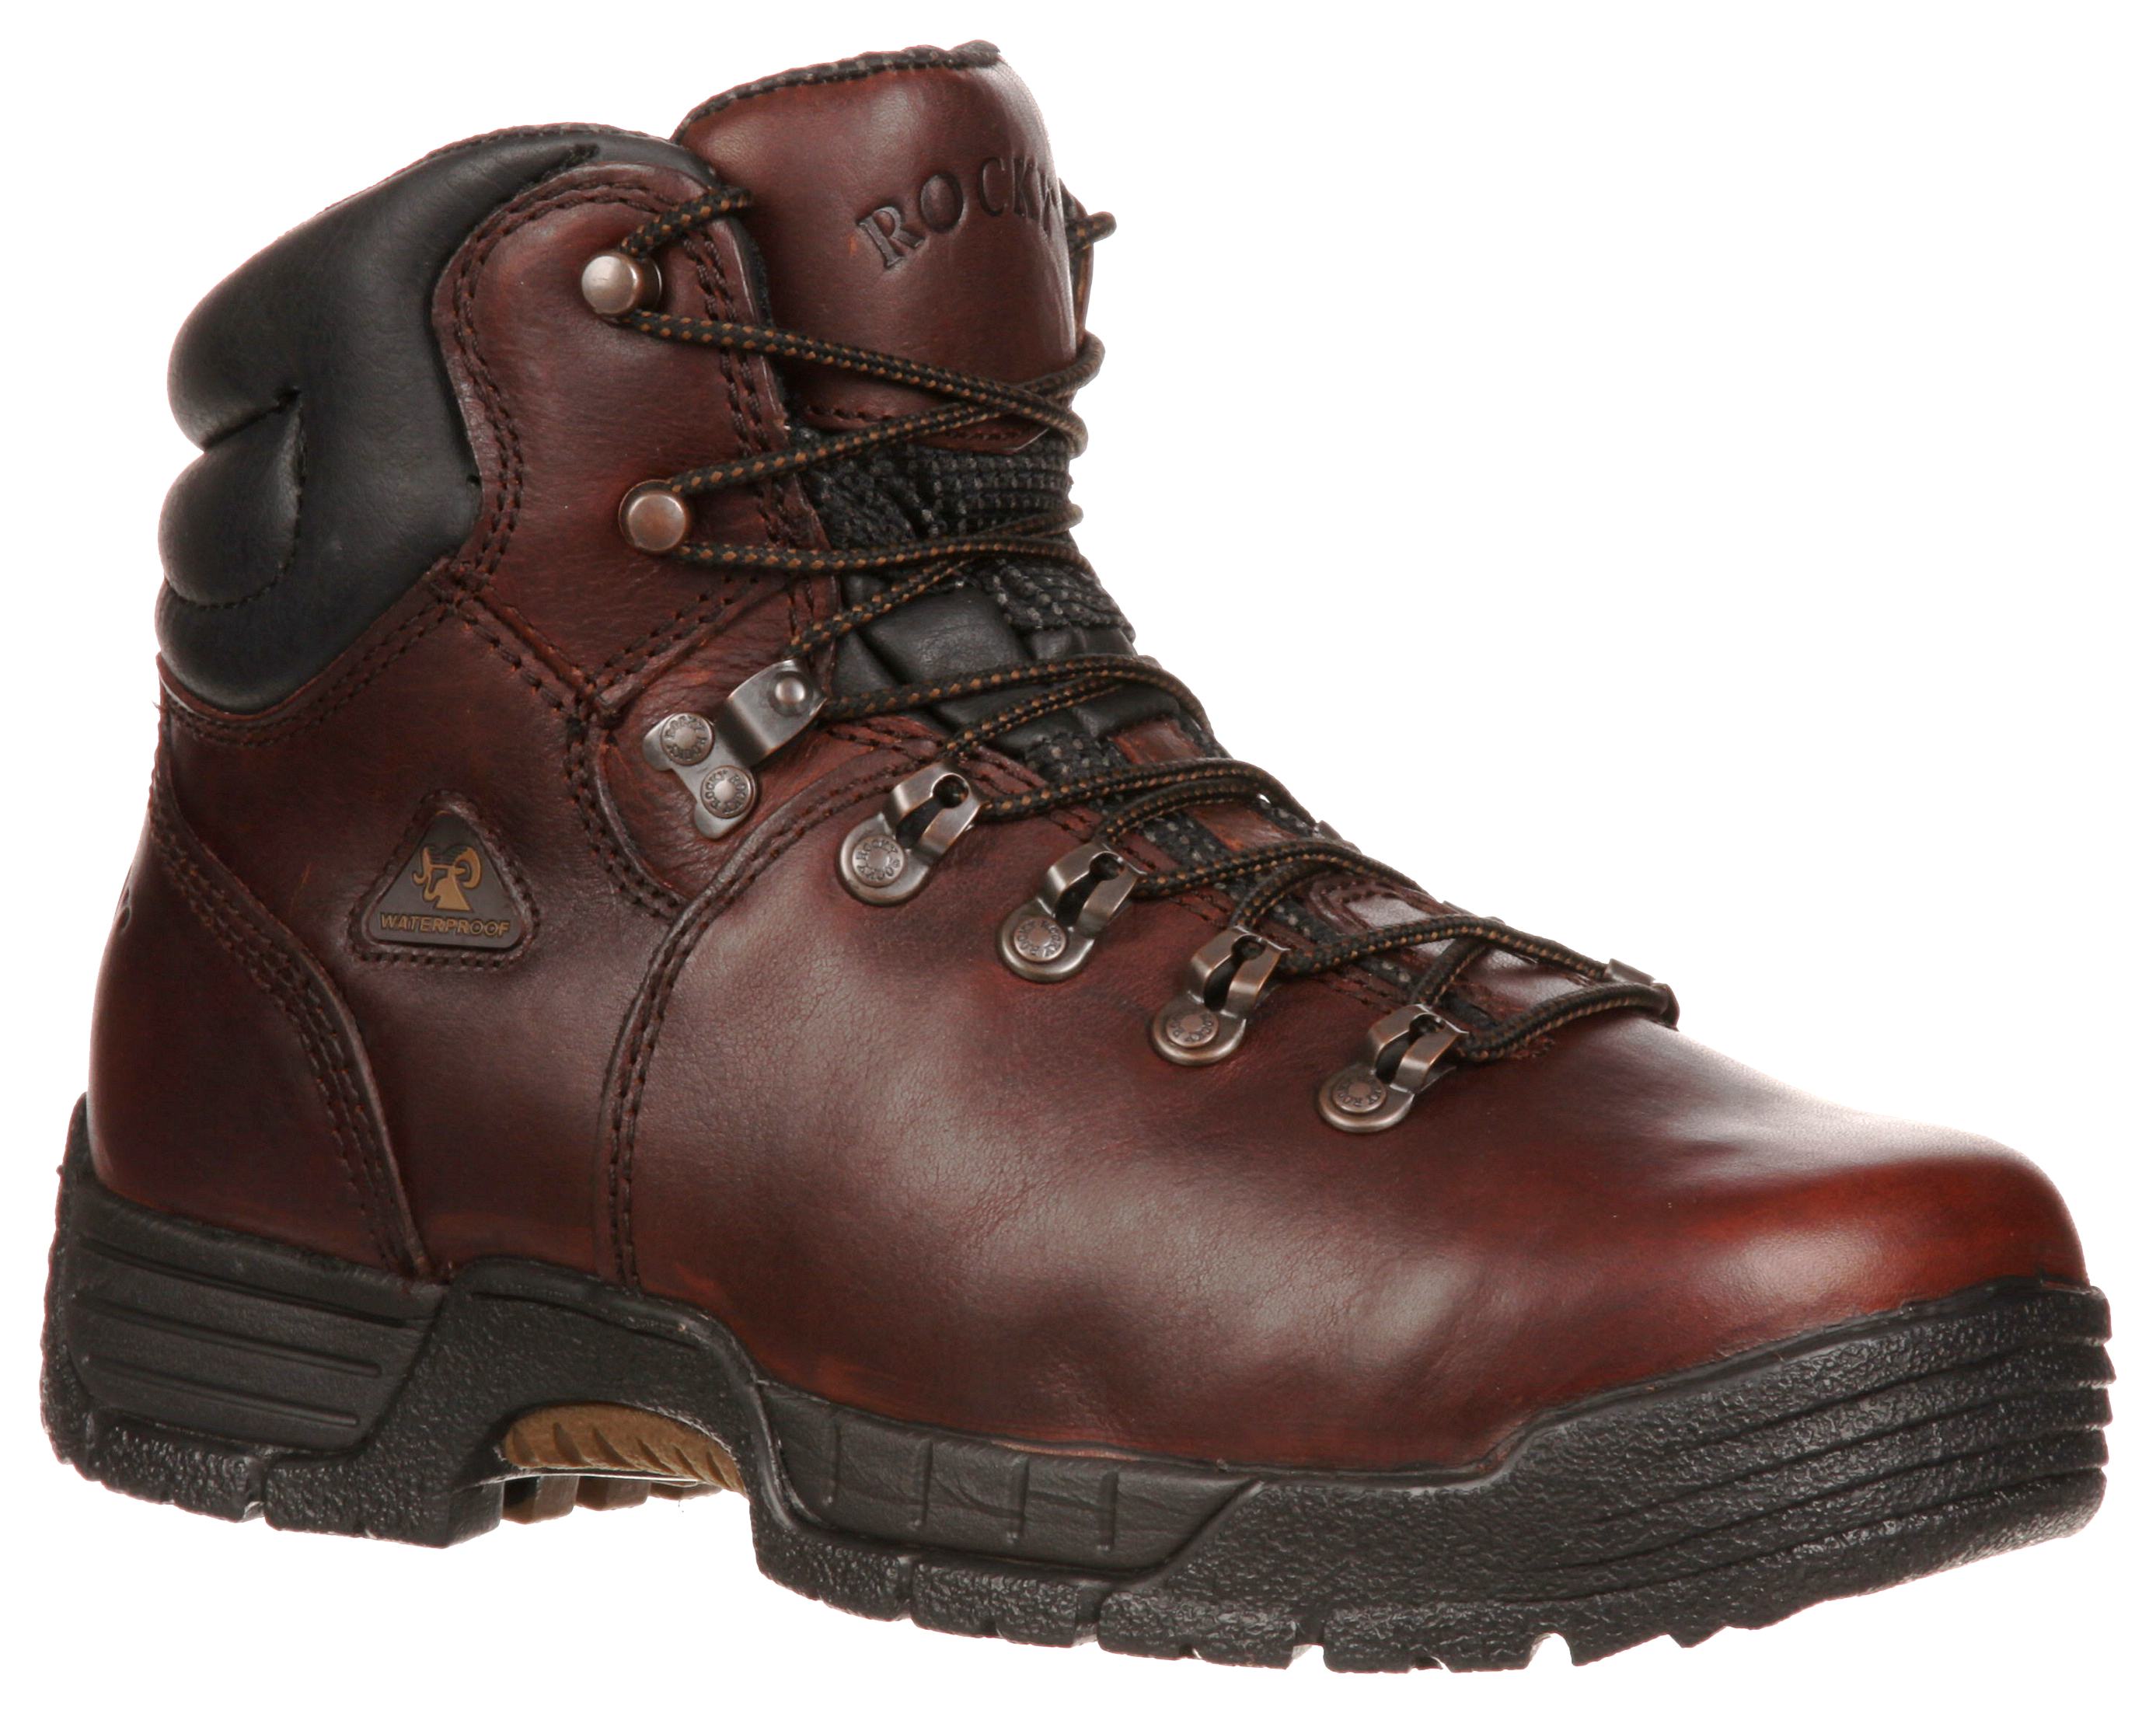 ROCKY MobiLite Waterproof Work Boots for Men - Brown - 9 M